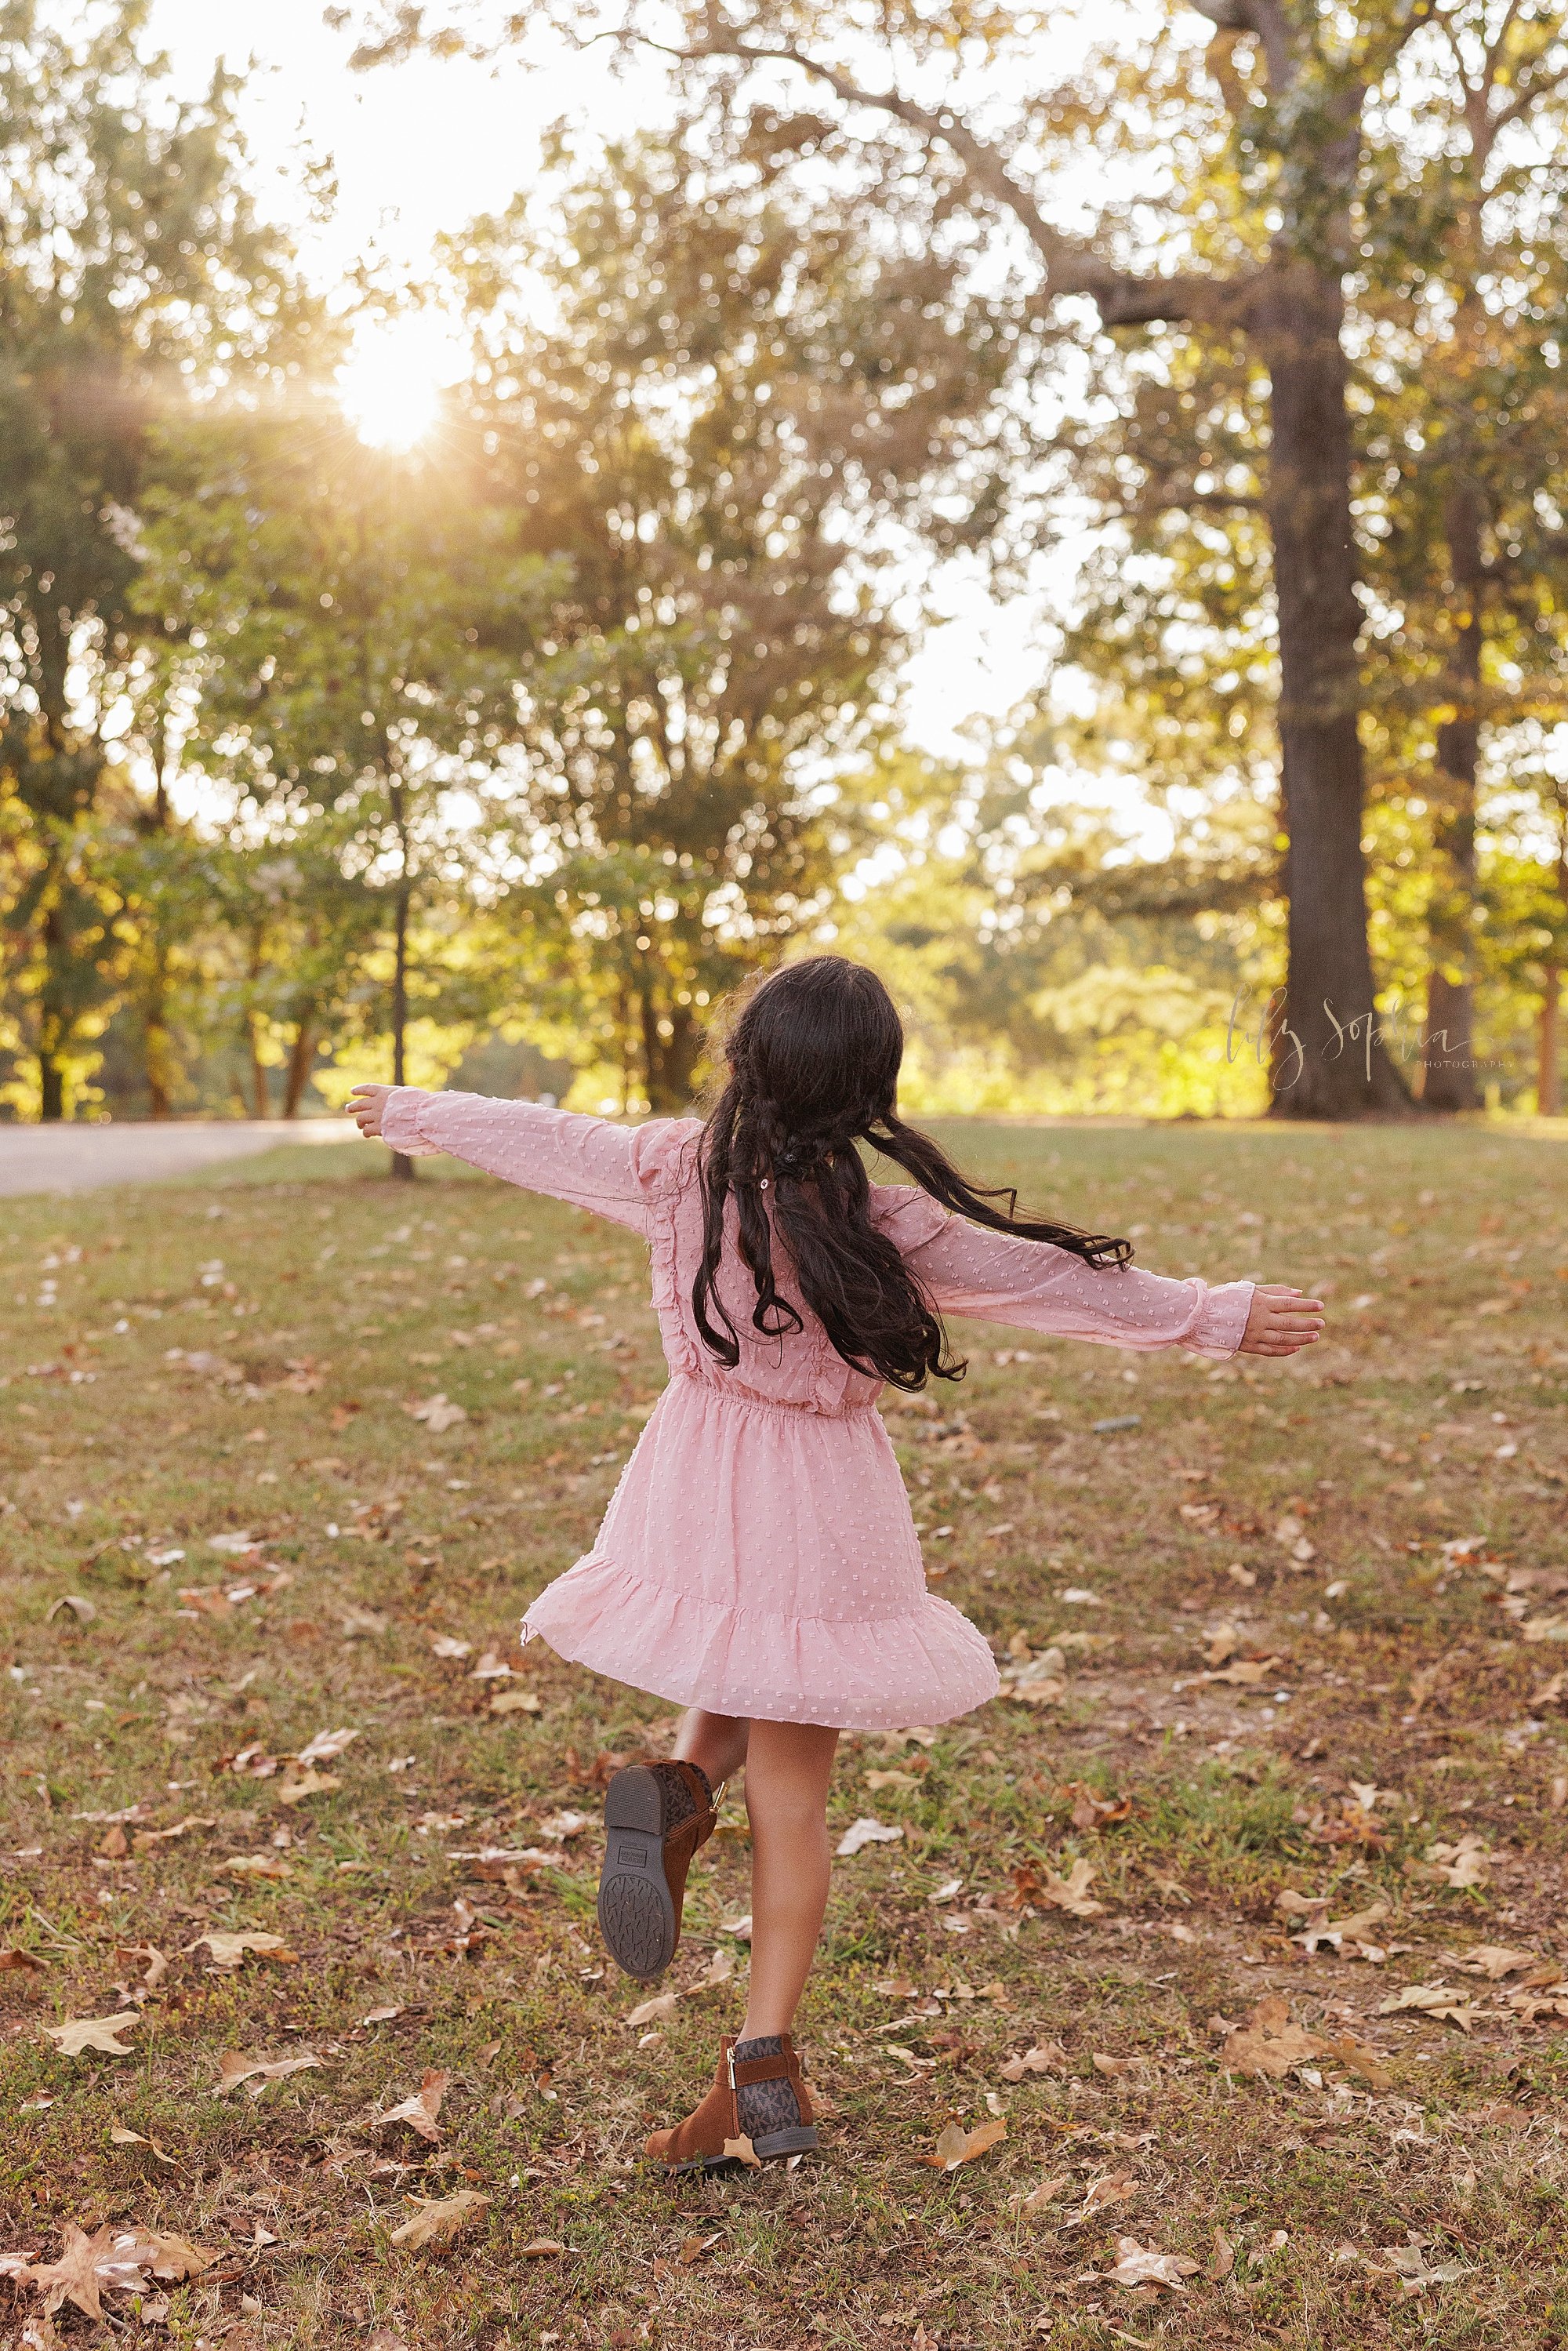  As a young girl freely twirls during autumn in an Atlanta park, her picture is captured at sunset for a family photo session. 